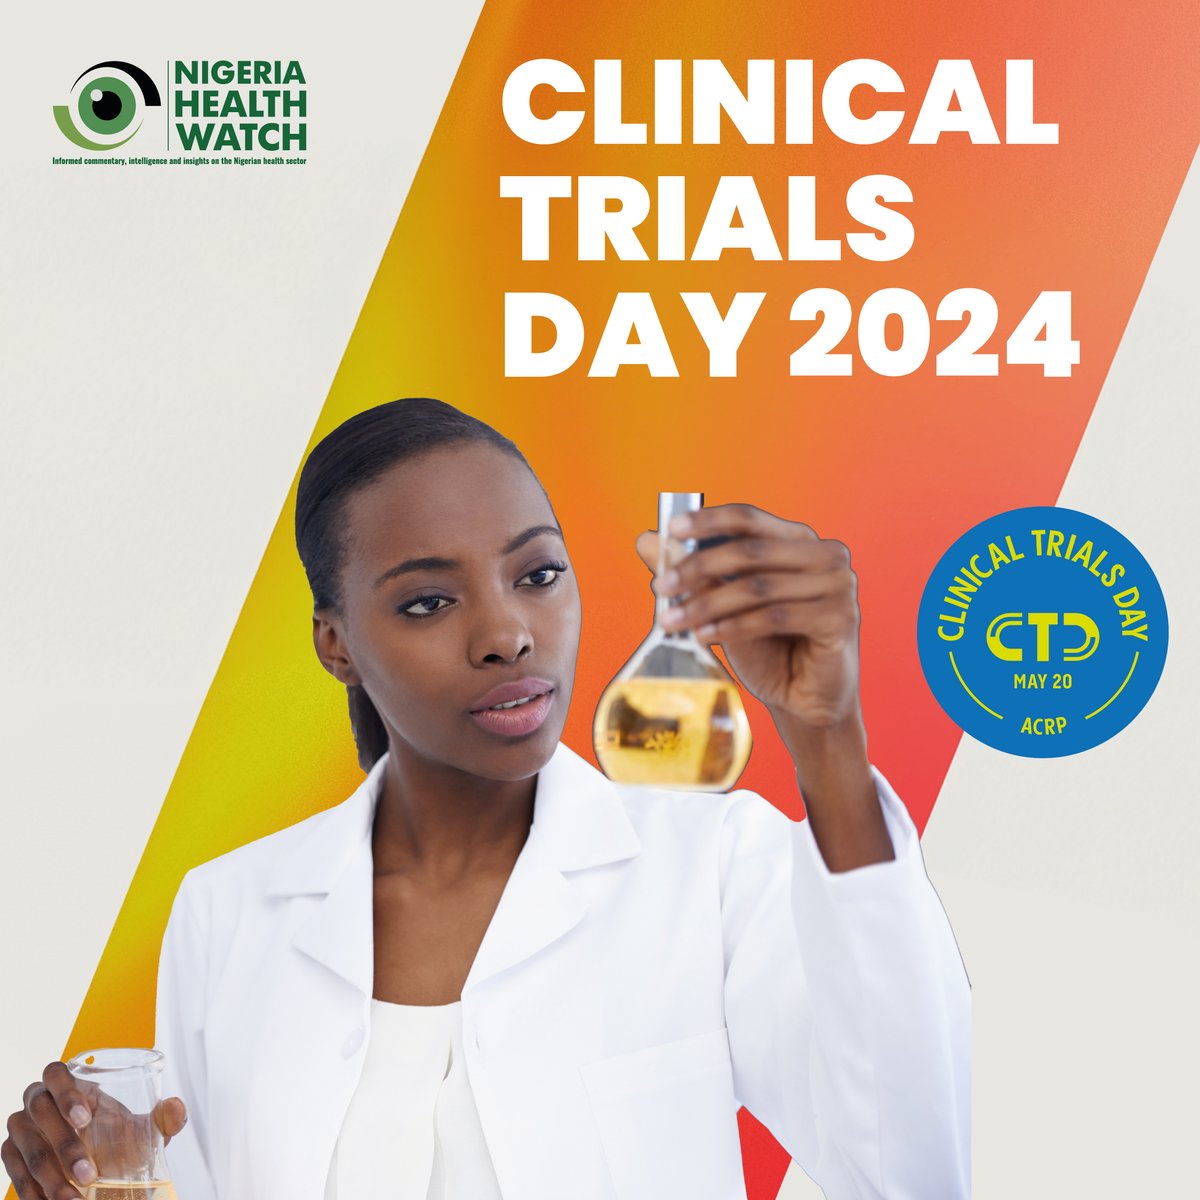 Today, on #ClinicalTrialsDay, we spotlight two crucial trials that could save lives: A Phase II Lassa fever vaccine study in West Africa, and research testing tranexamic acid to treat postpartum haemorrhage, a leading cause of maternal deaths in Nigeria.